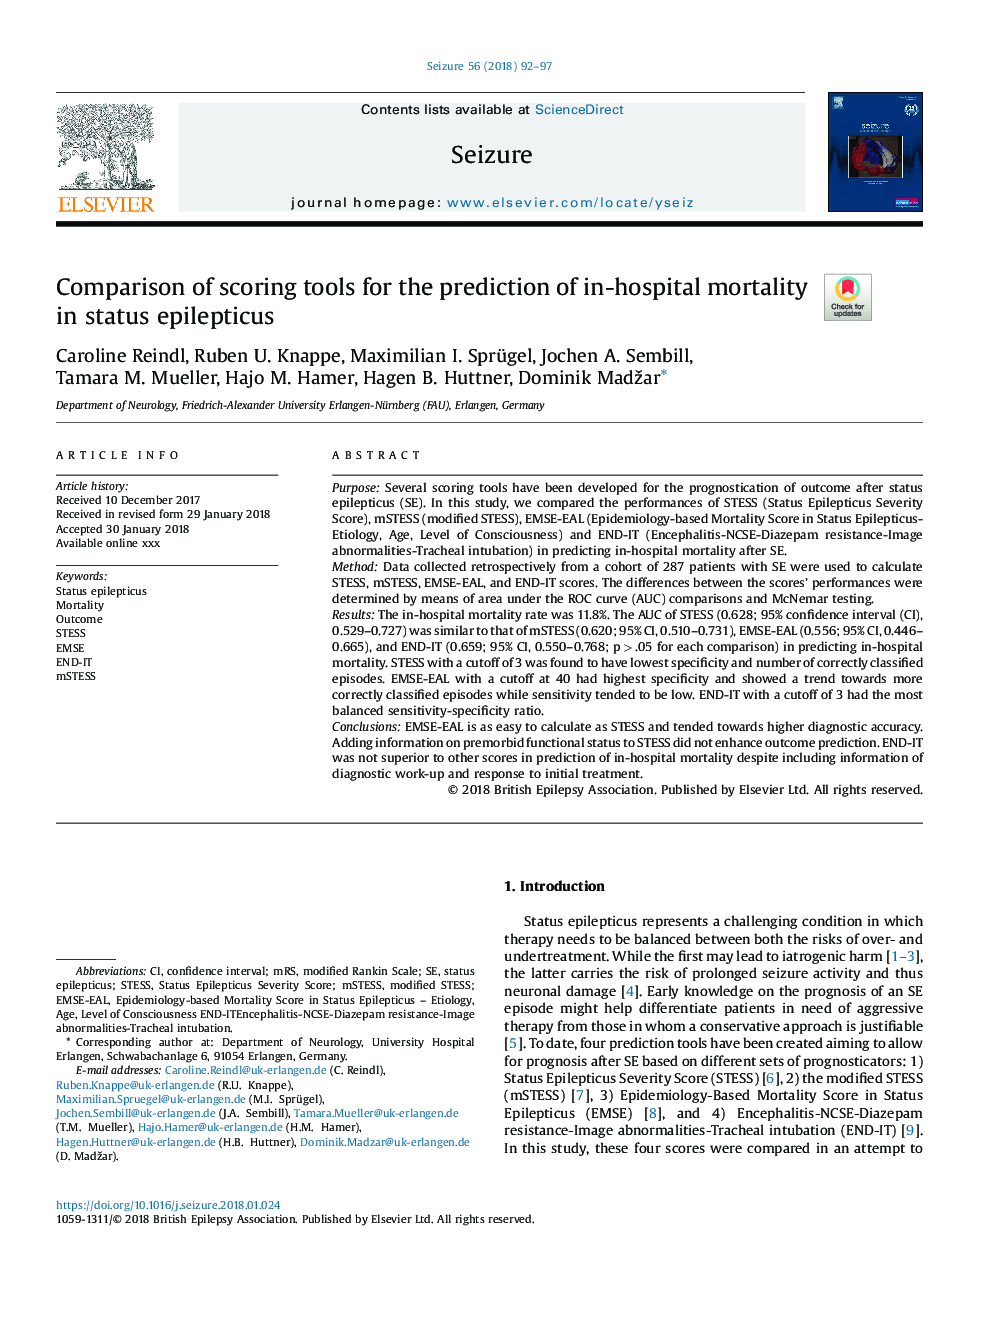 Comparison of scoring tools for the prediction of in-hospital mortality in status epilepticus